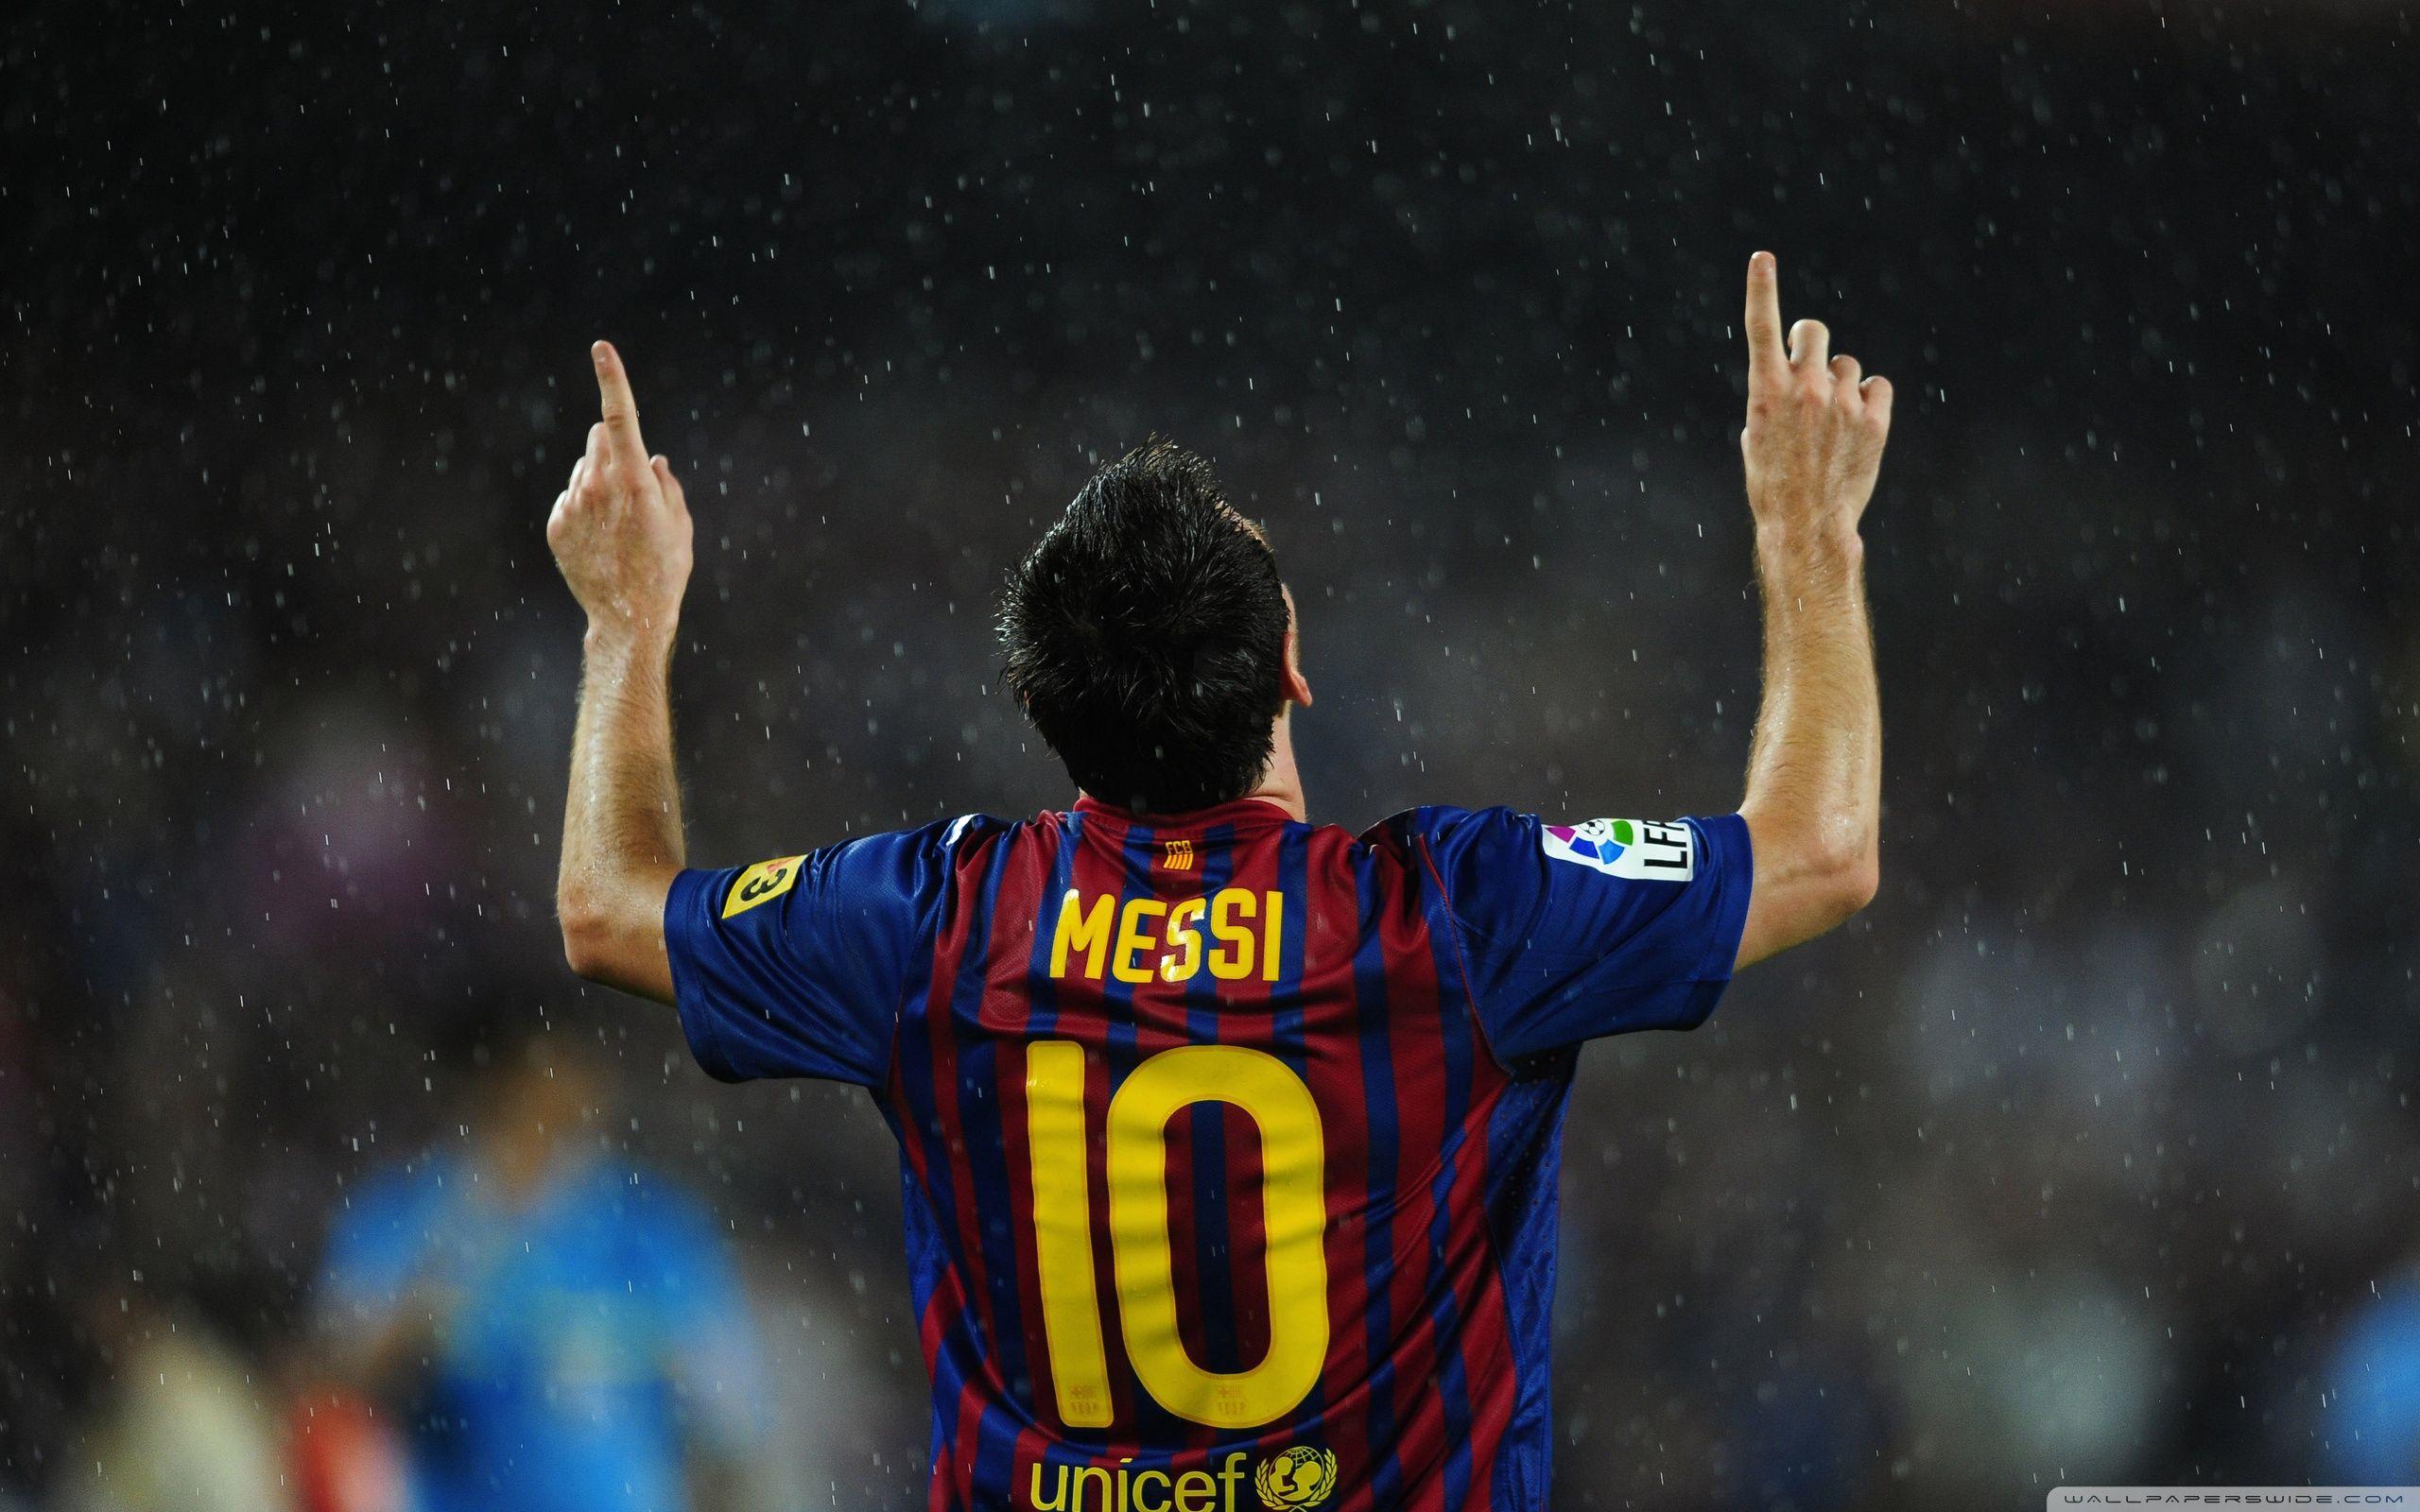 lionel messi hd wallpapers